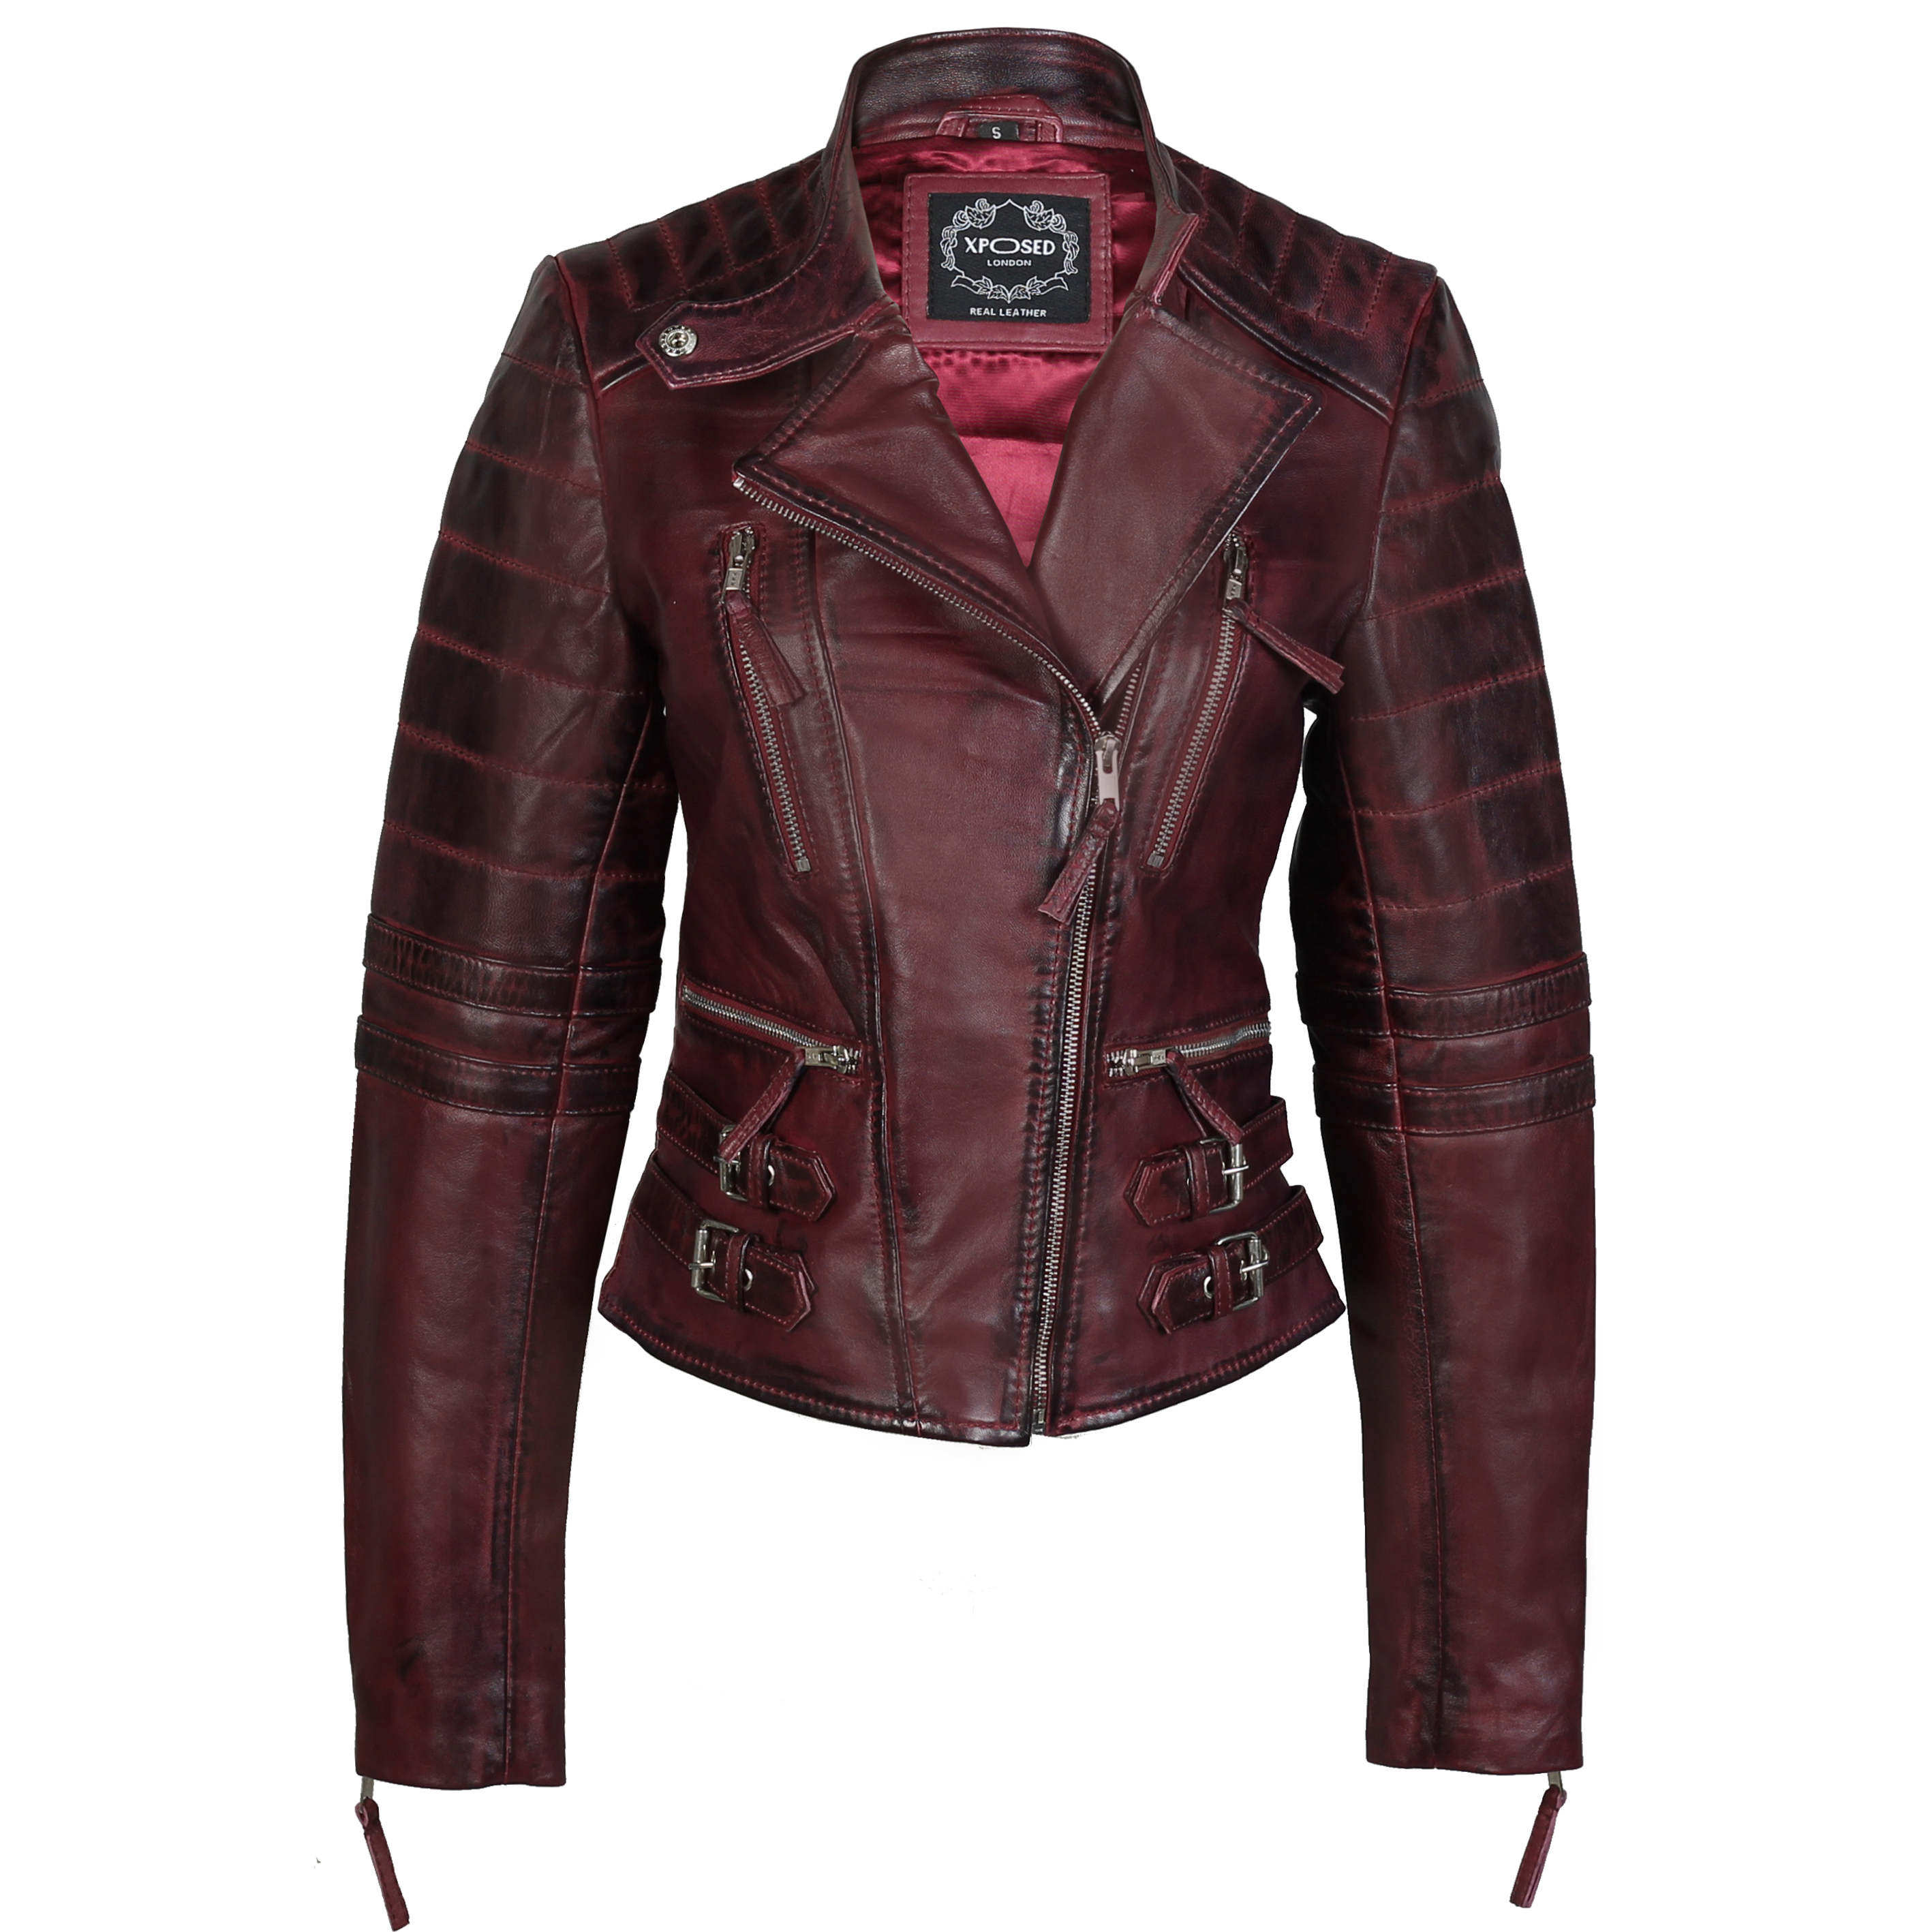 XPOSED JACKET WITH BUCKLES IN WINE